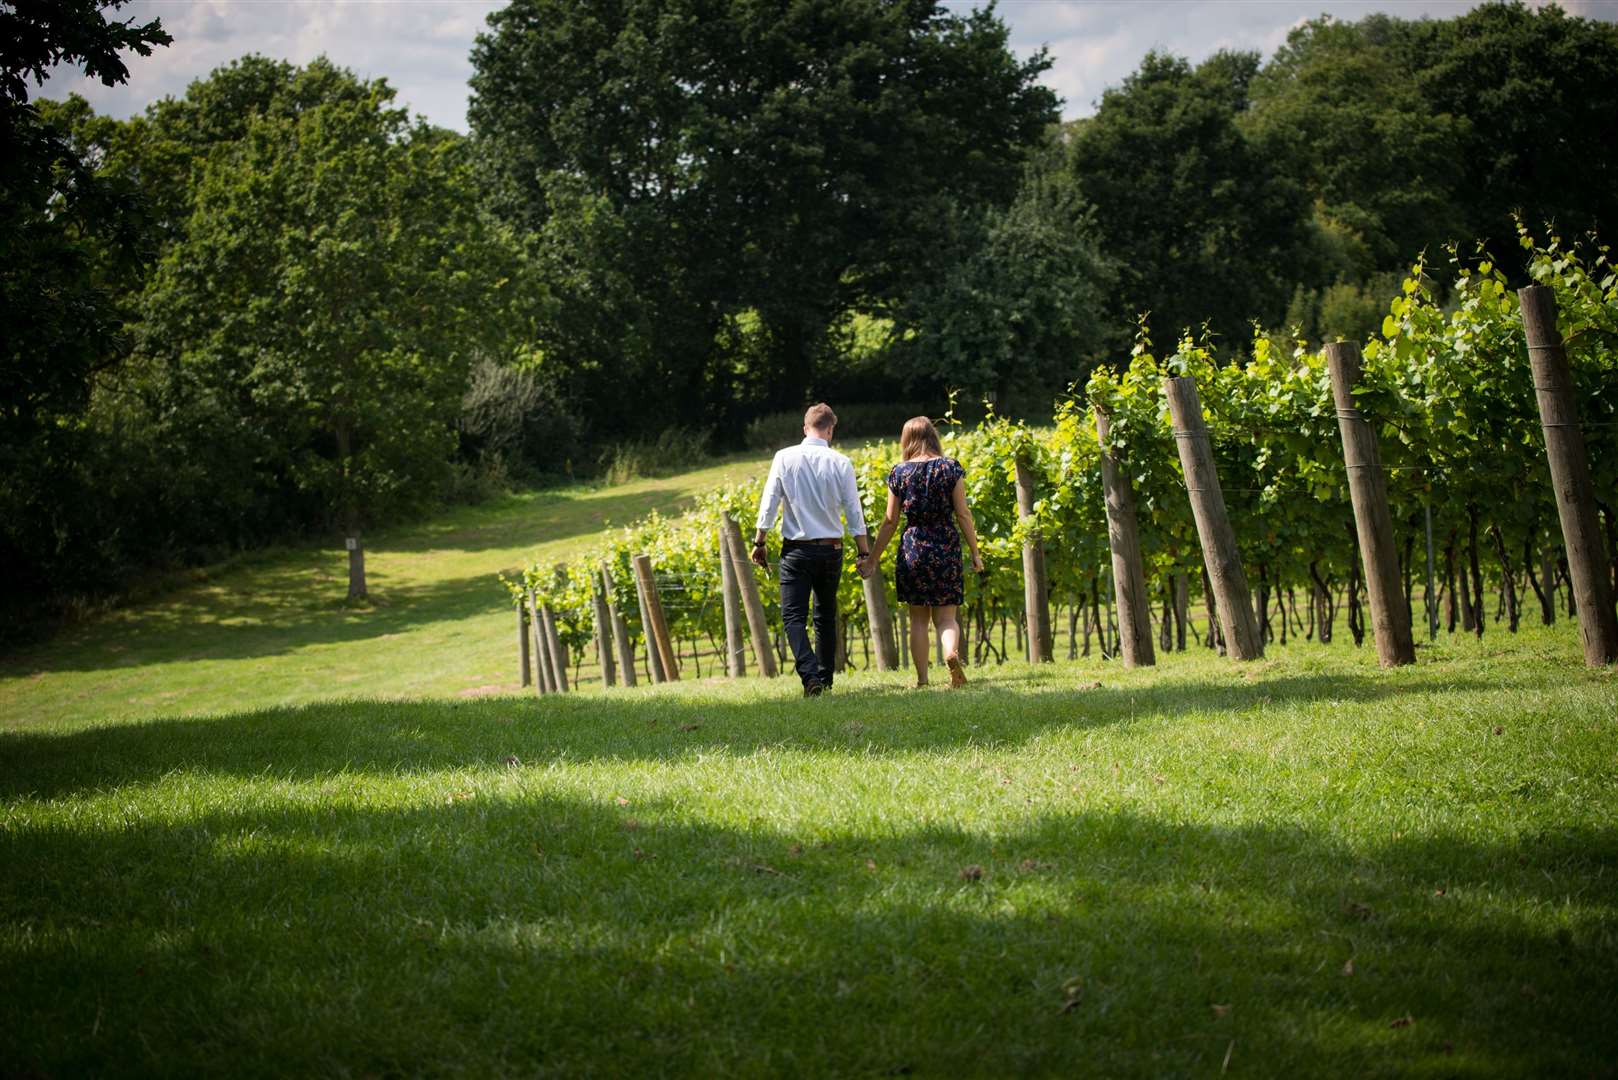 Chapel Down has won several awards for its English wines. Picture: Chris Gale / Storm Studios